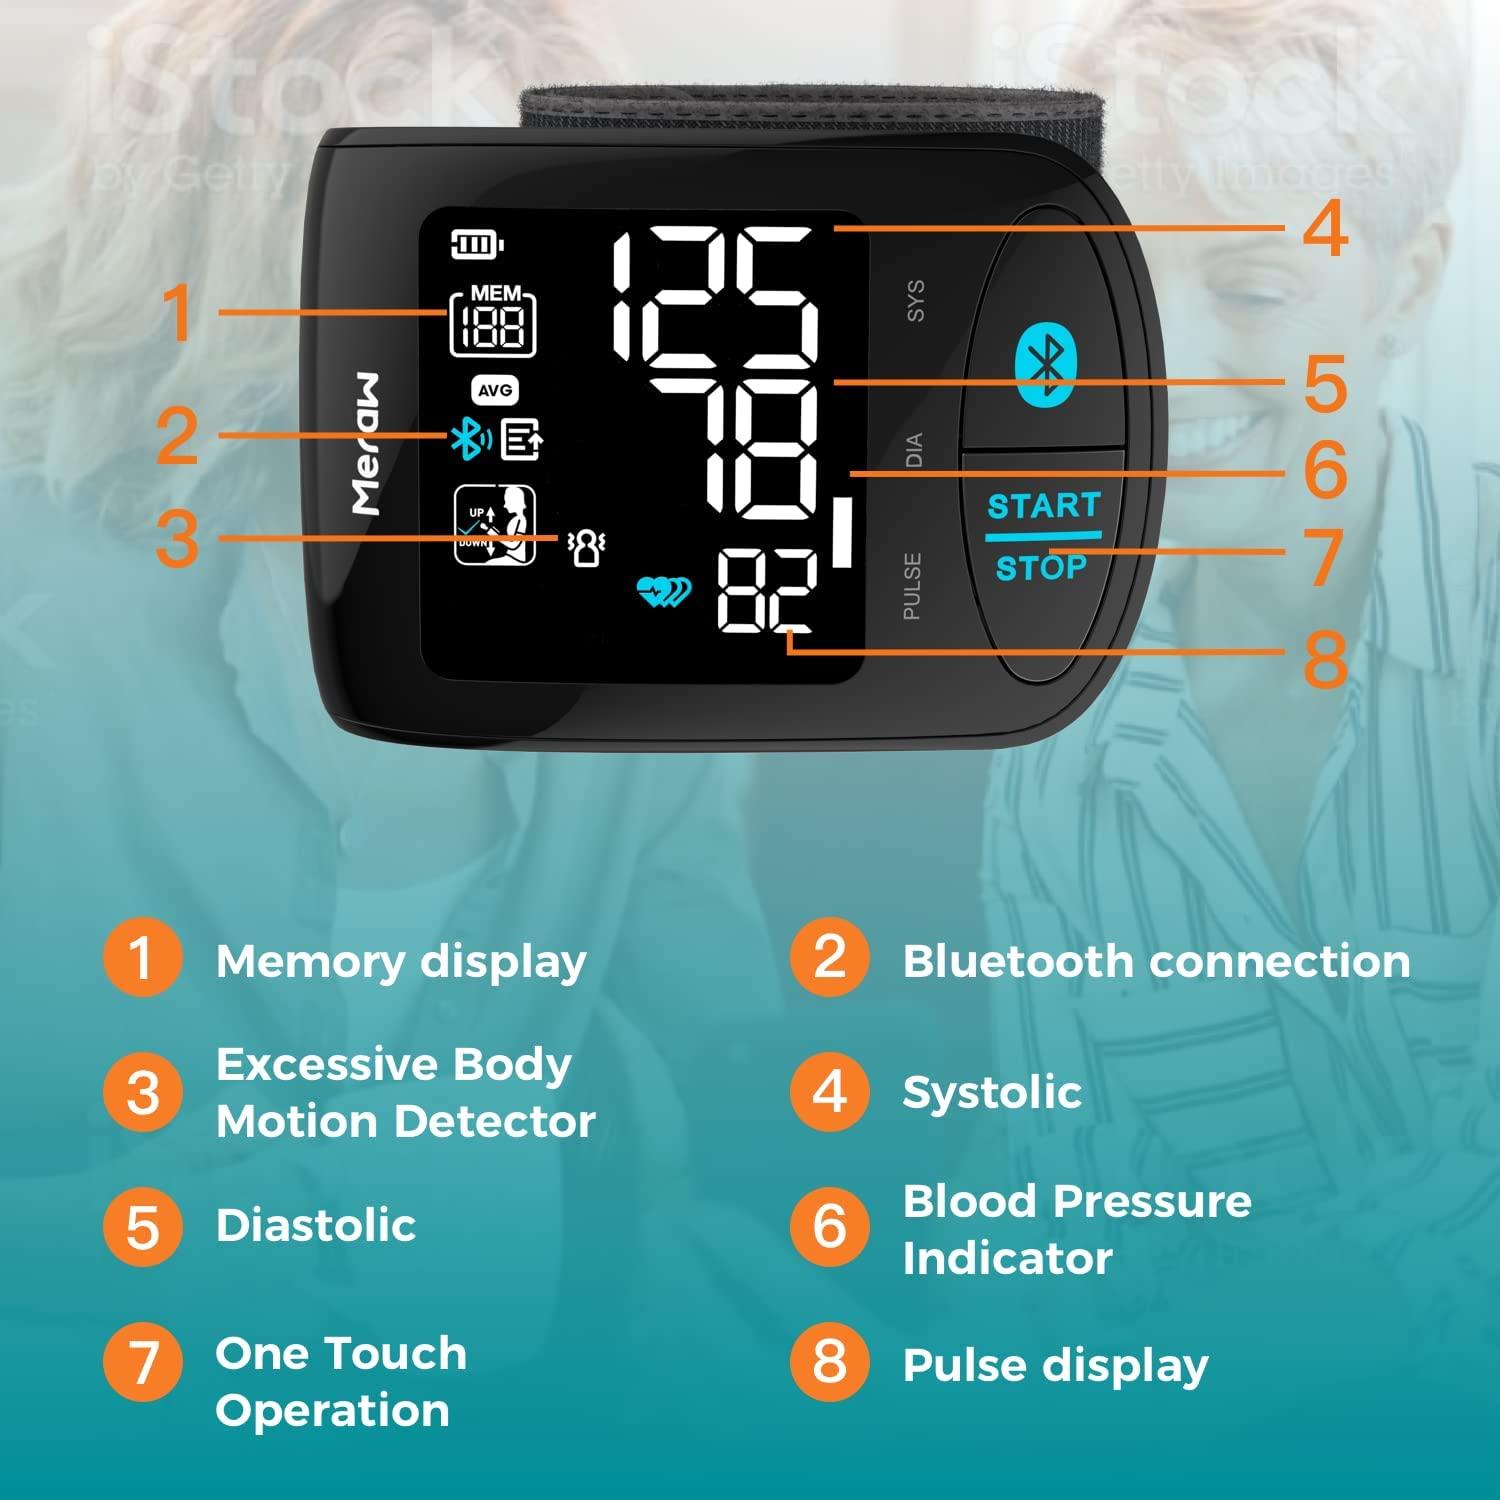 Meraw Blood Pressure Monitor Home Use, Blood Pressure Cuff Digital Arm,  Blood Pressure Monitor Automatic Cuff 8.7-16.5 Bluetooth App Tracking